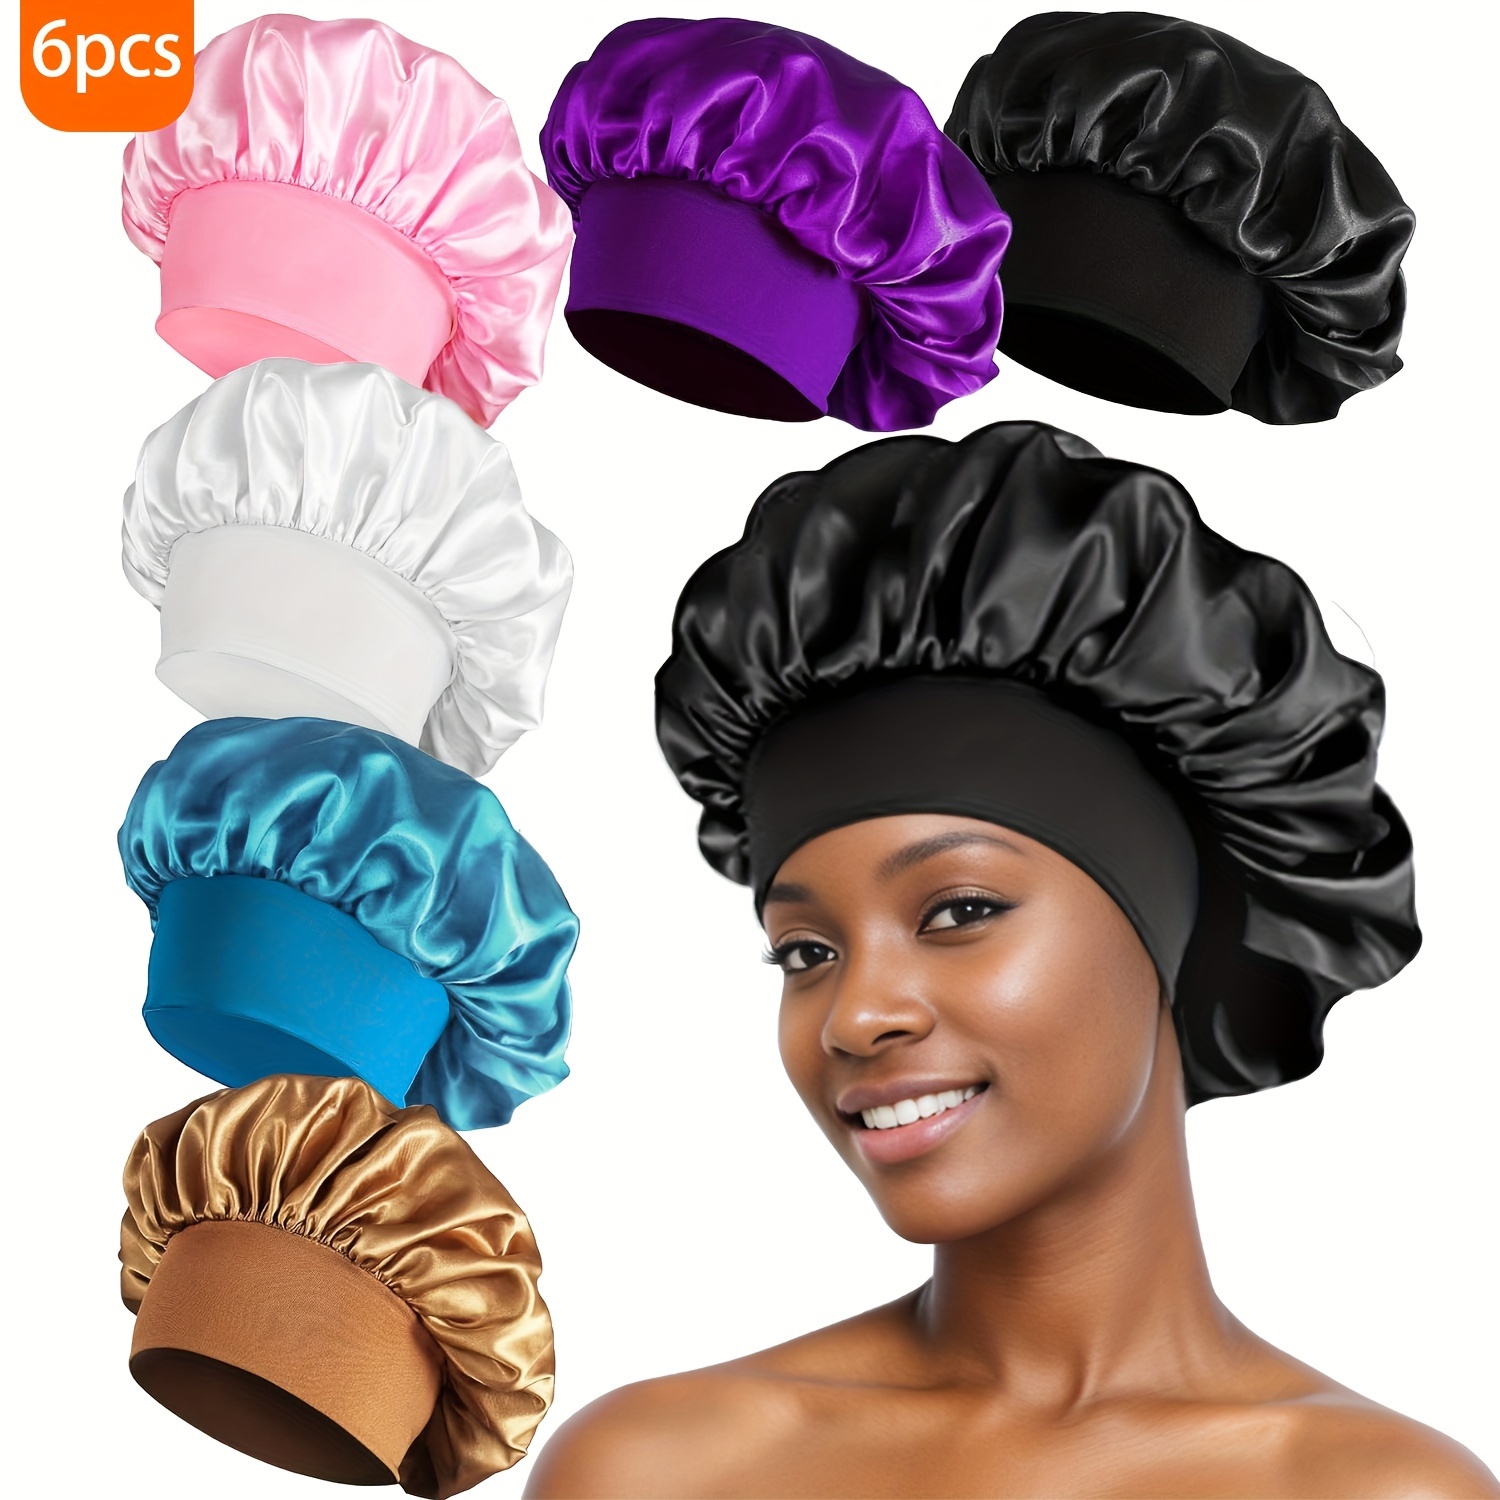 

6pcs Satin Bonnets For Women, Elastic Band Sleep Cap, Solid Color, Silky Night Hair Cover With Wide Brim, Fashion Comfortable Hair Bonnets For Home, Sports, Casual Use